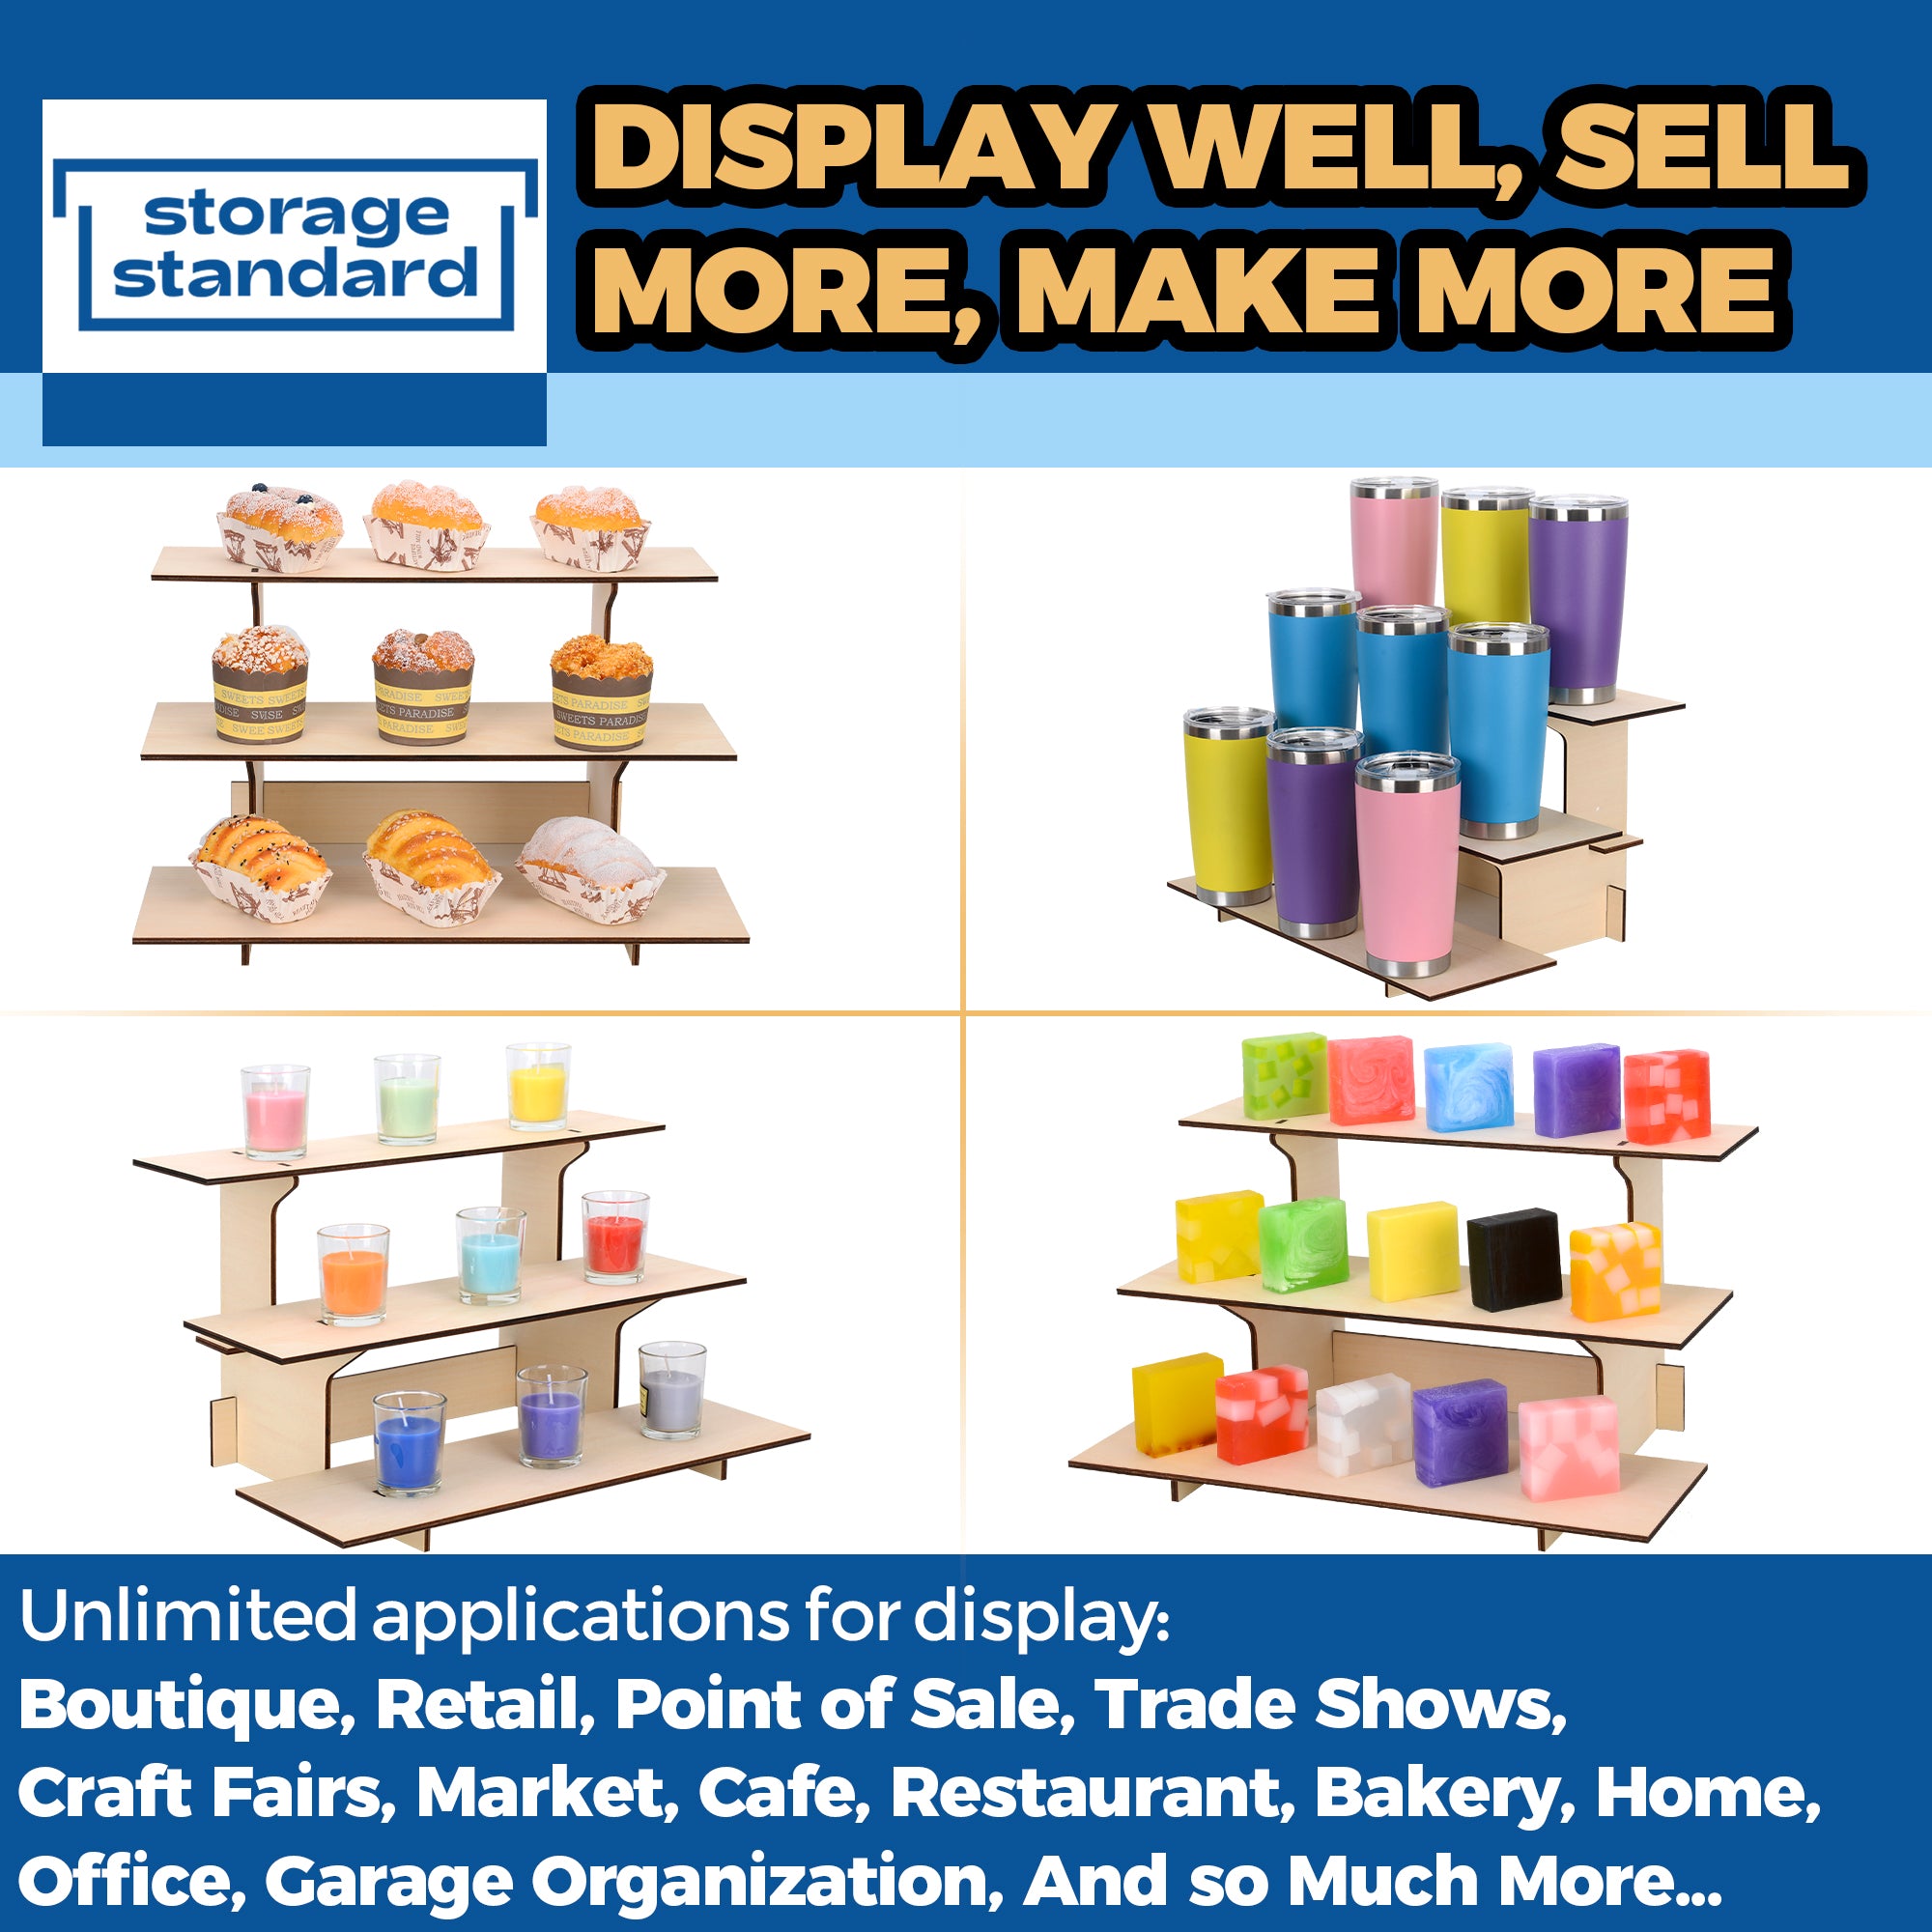 3 Tier Wooden Display Stand - Farmers Market Display Shelf for Food & Merchandise, Retail Display Shelves for Retail Stores & Vendors - Straight Tiered Table Display Tower Stand, 16 x 12 x 9 Inches